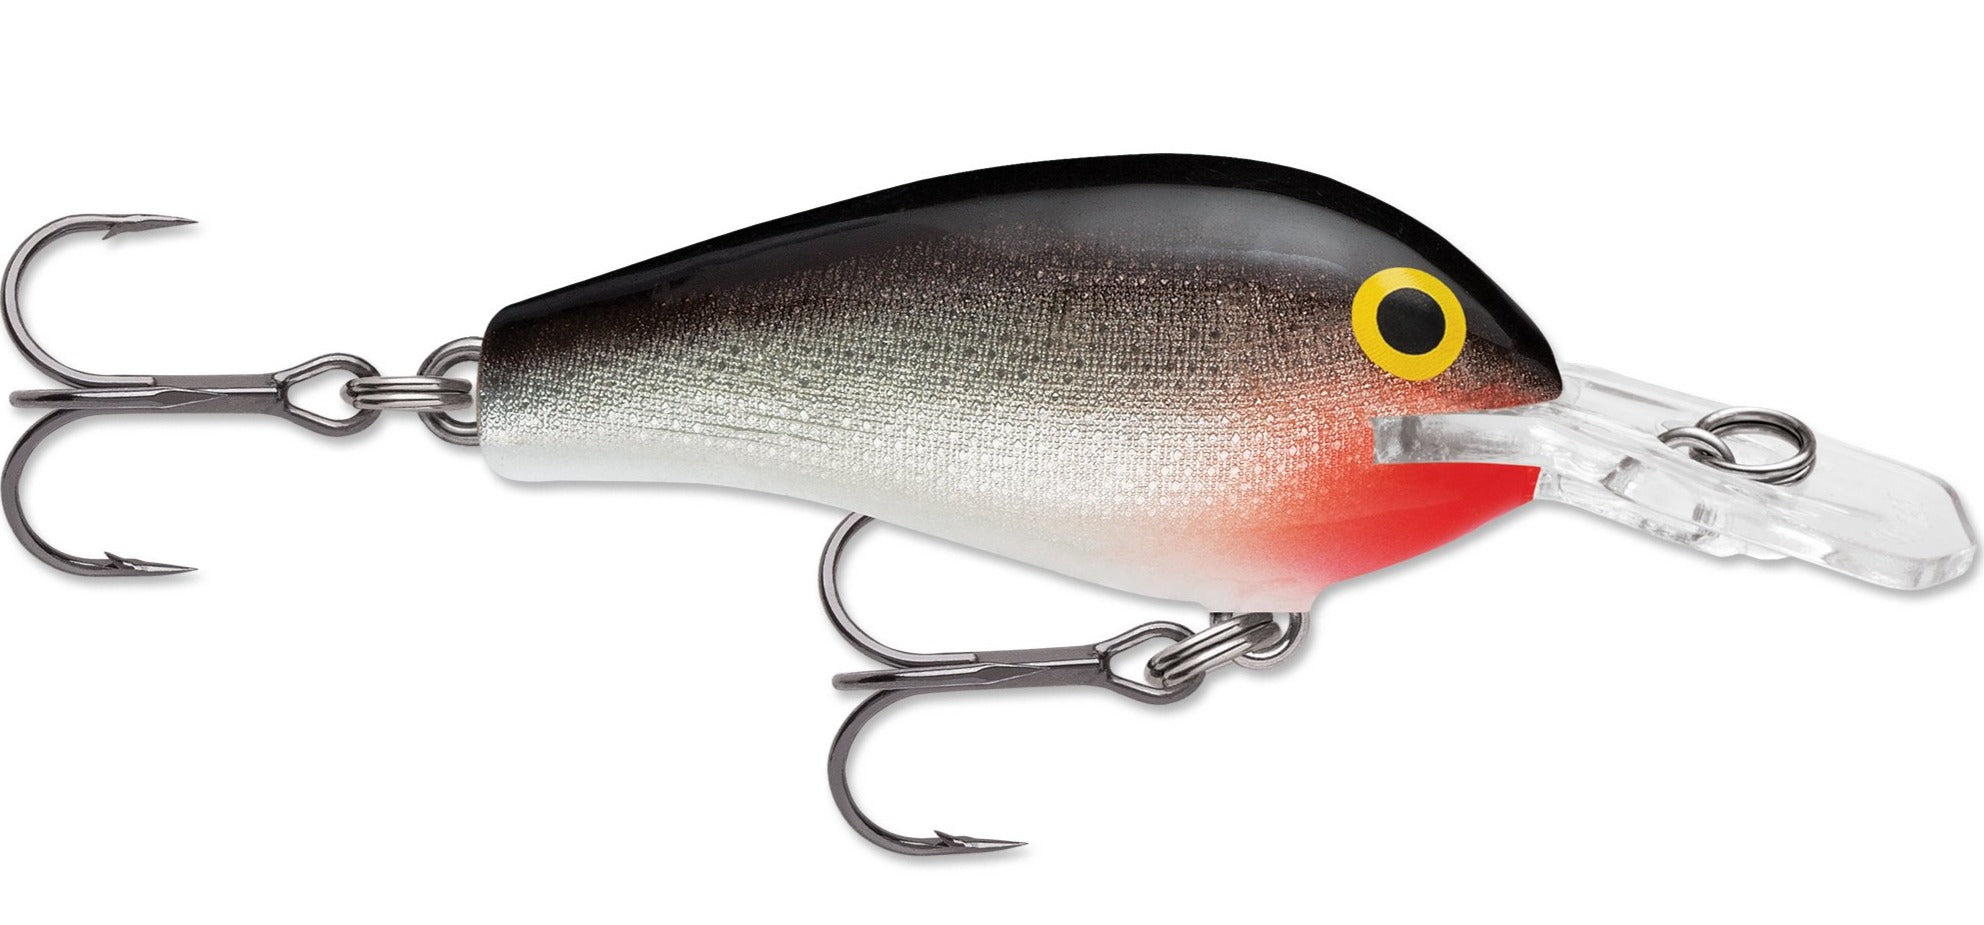 Lure Review- Rapala DT Fat 